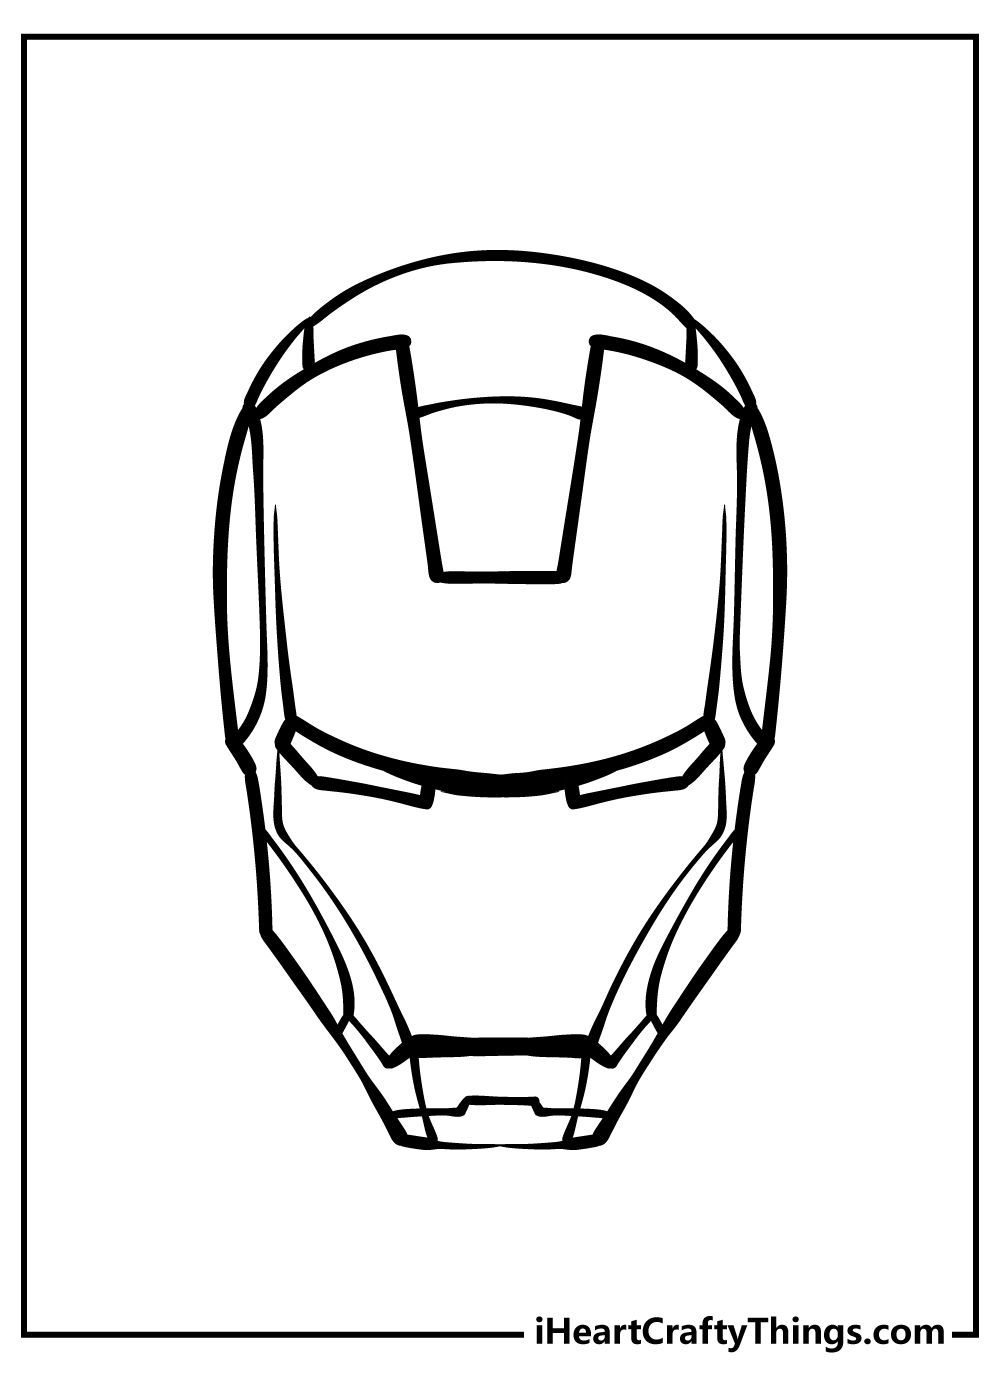 Iron Man’s helmet coloring pages